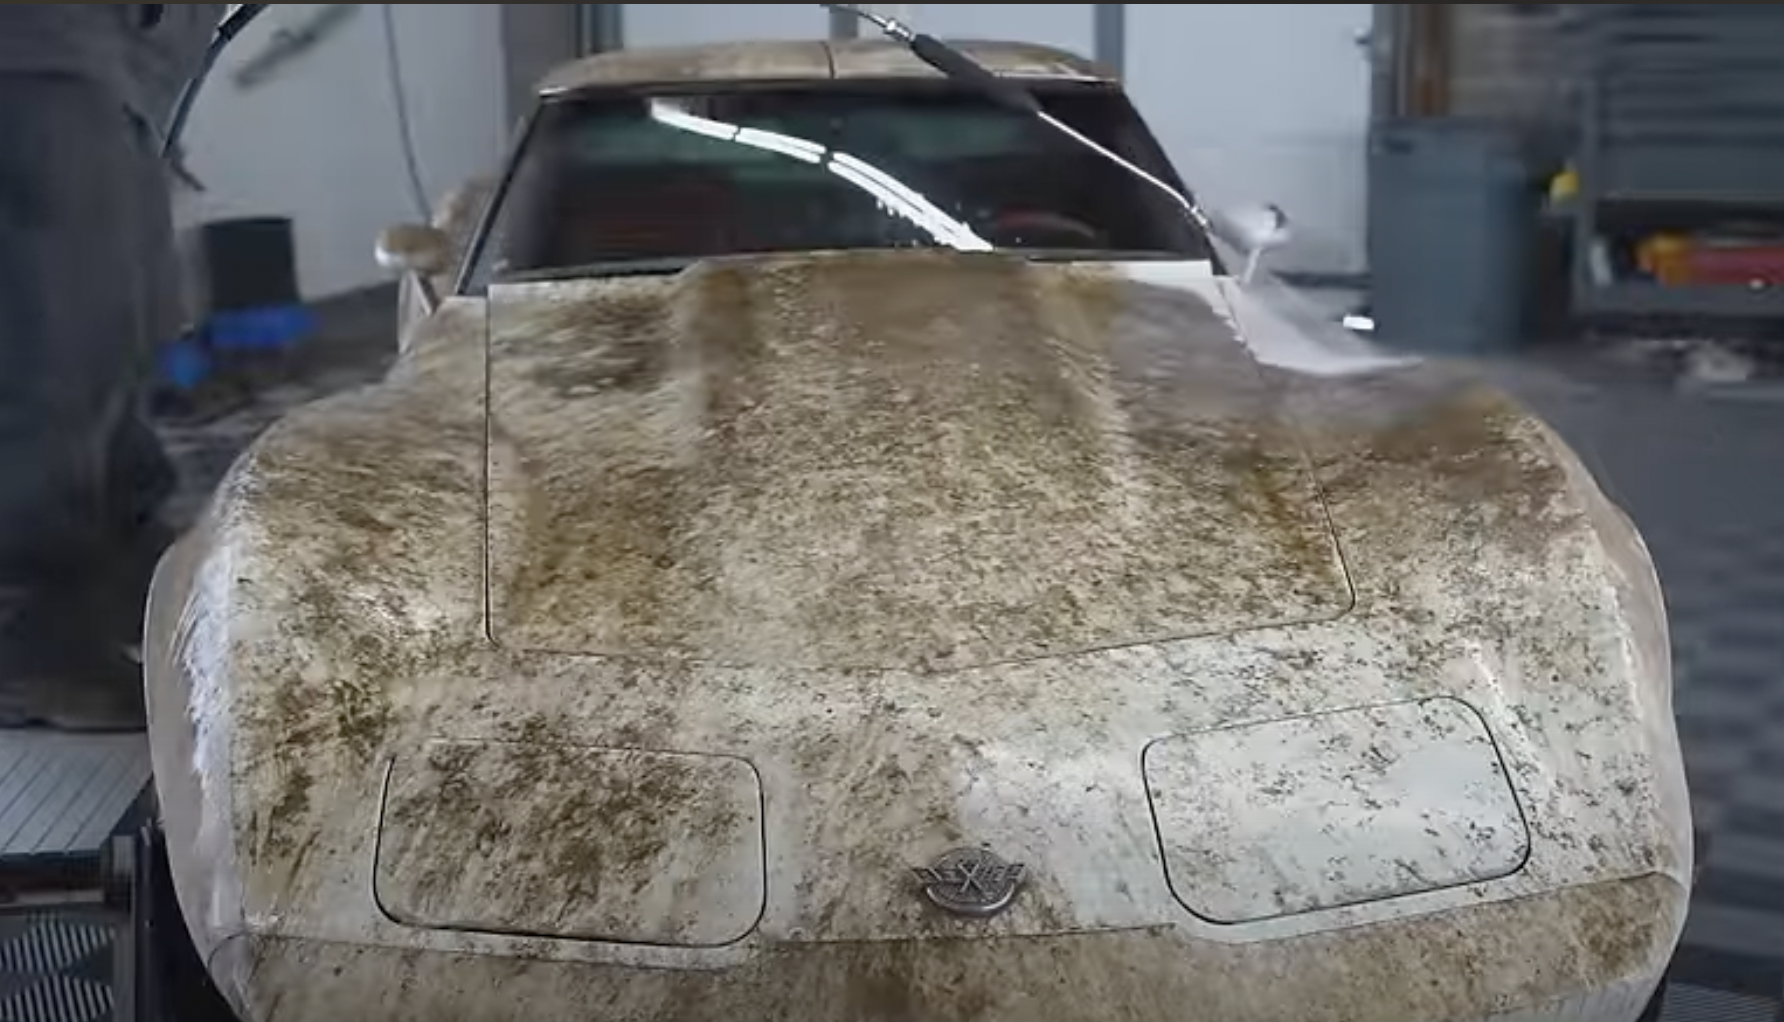 1978 Chevy Corvette Unearthed And Washed